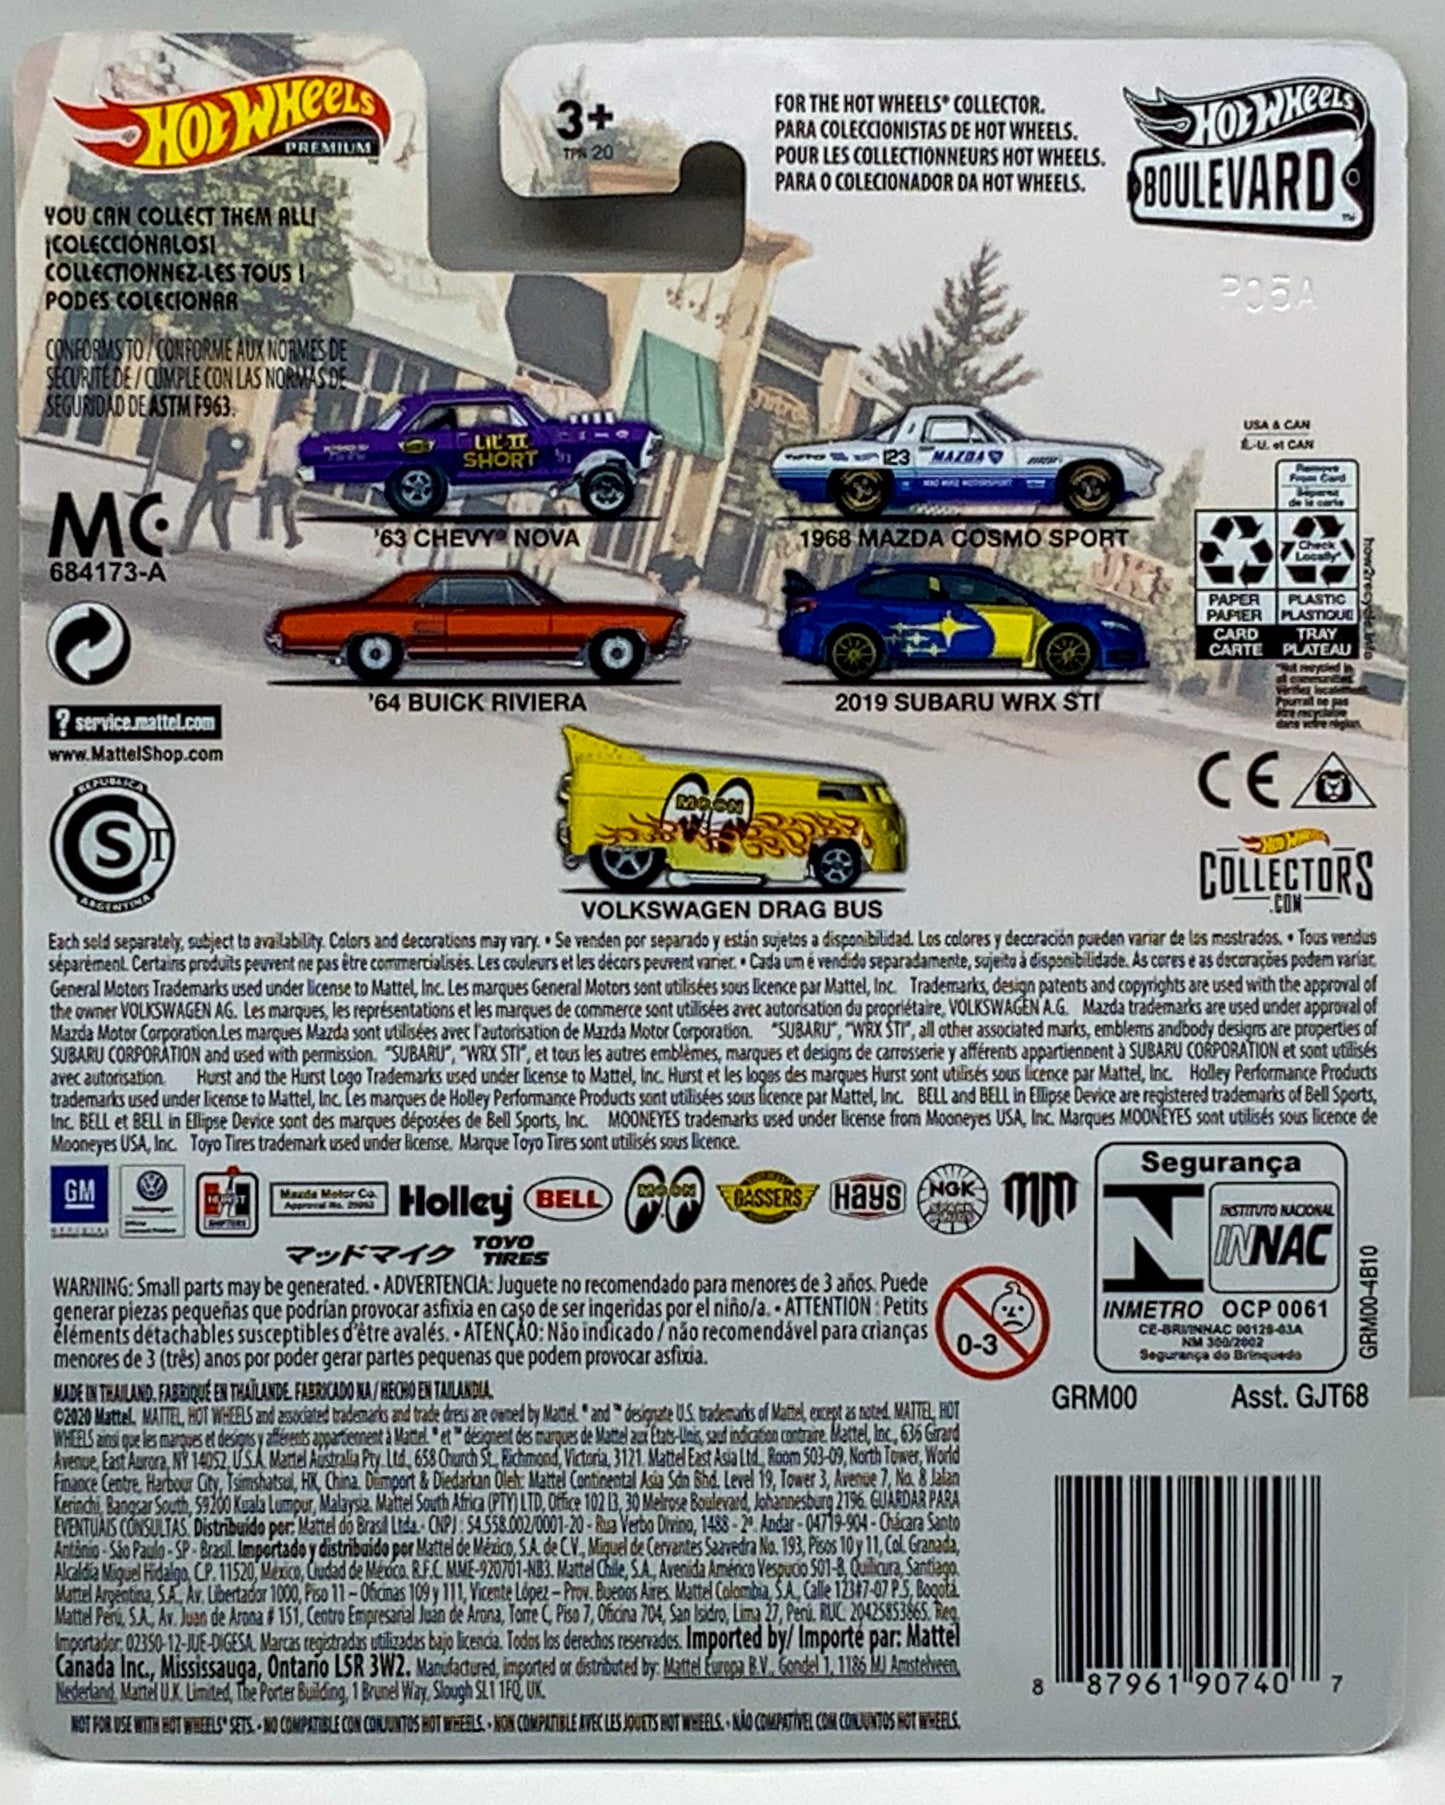 Buy at Tatoy Shop Back of Card shows the 5 Cars on Series Chevy Buick Mazda Subaru Volkswagen Collections